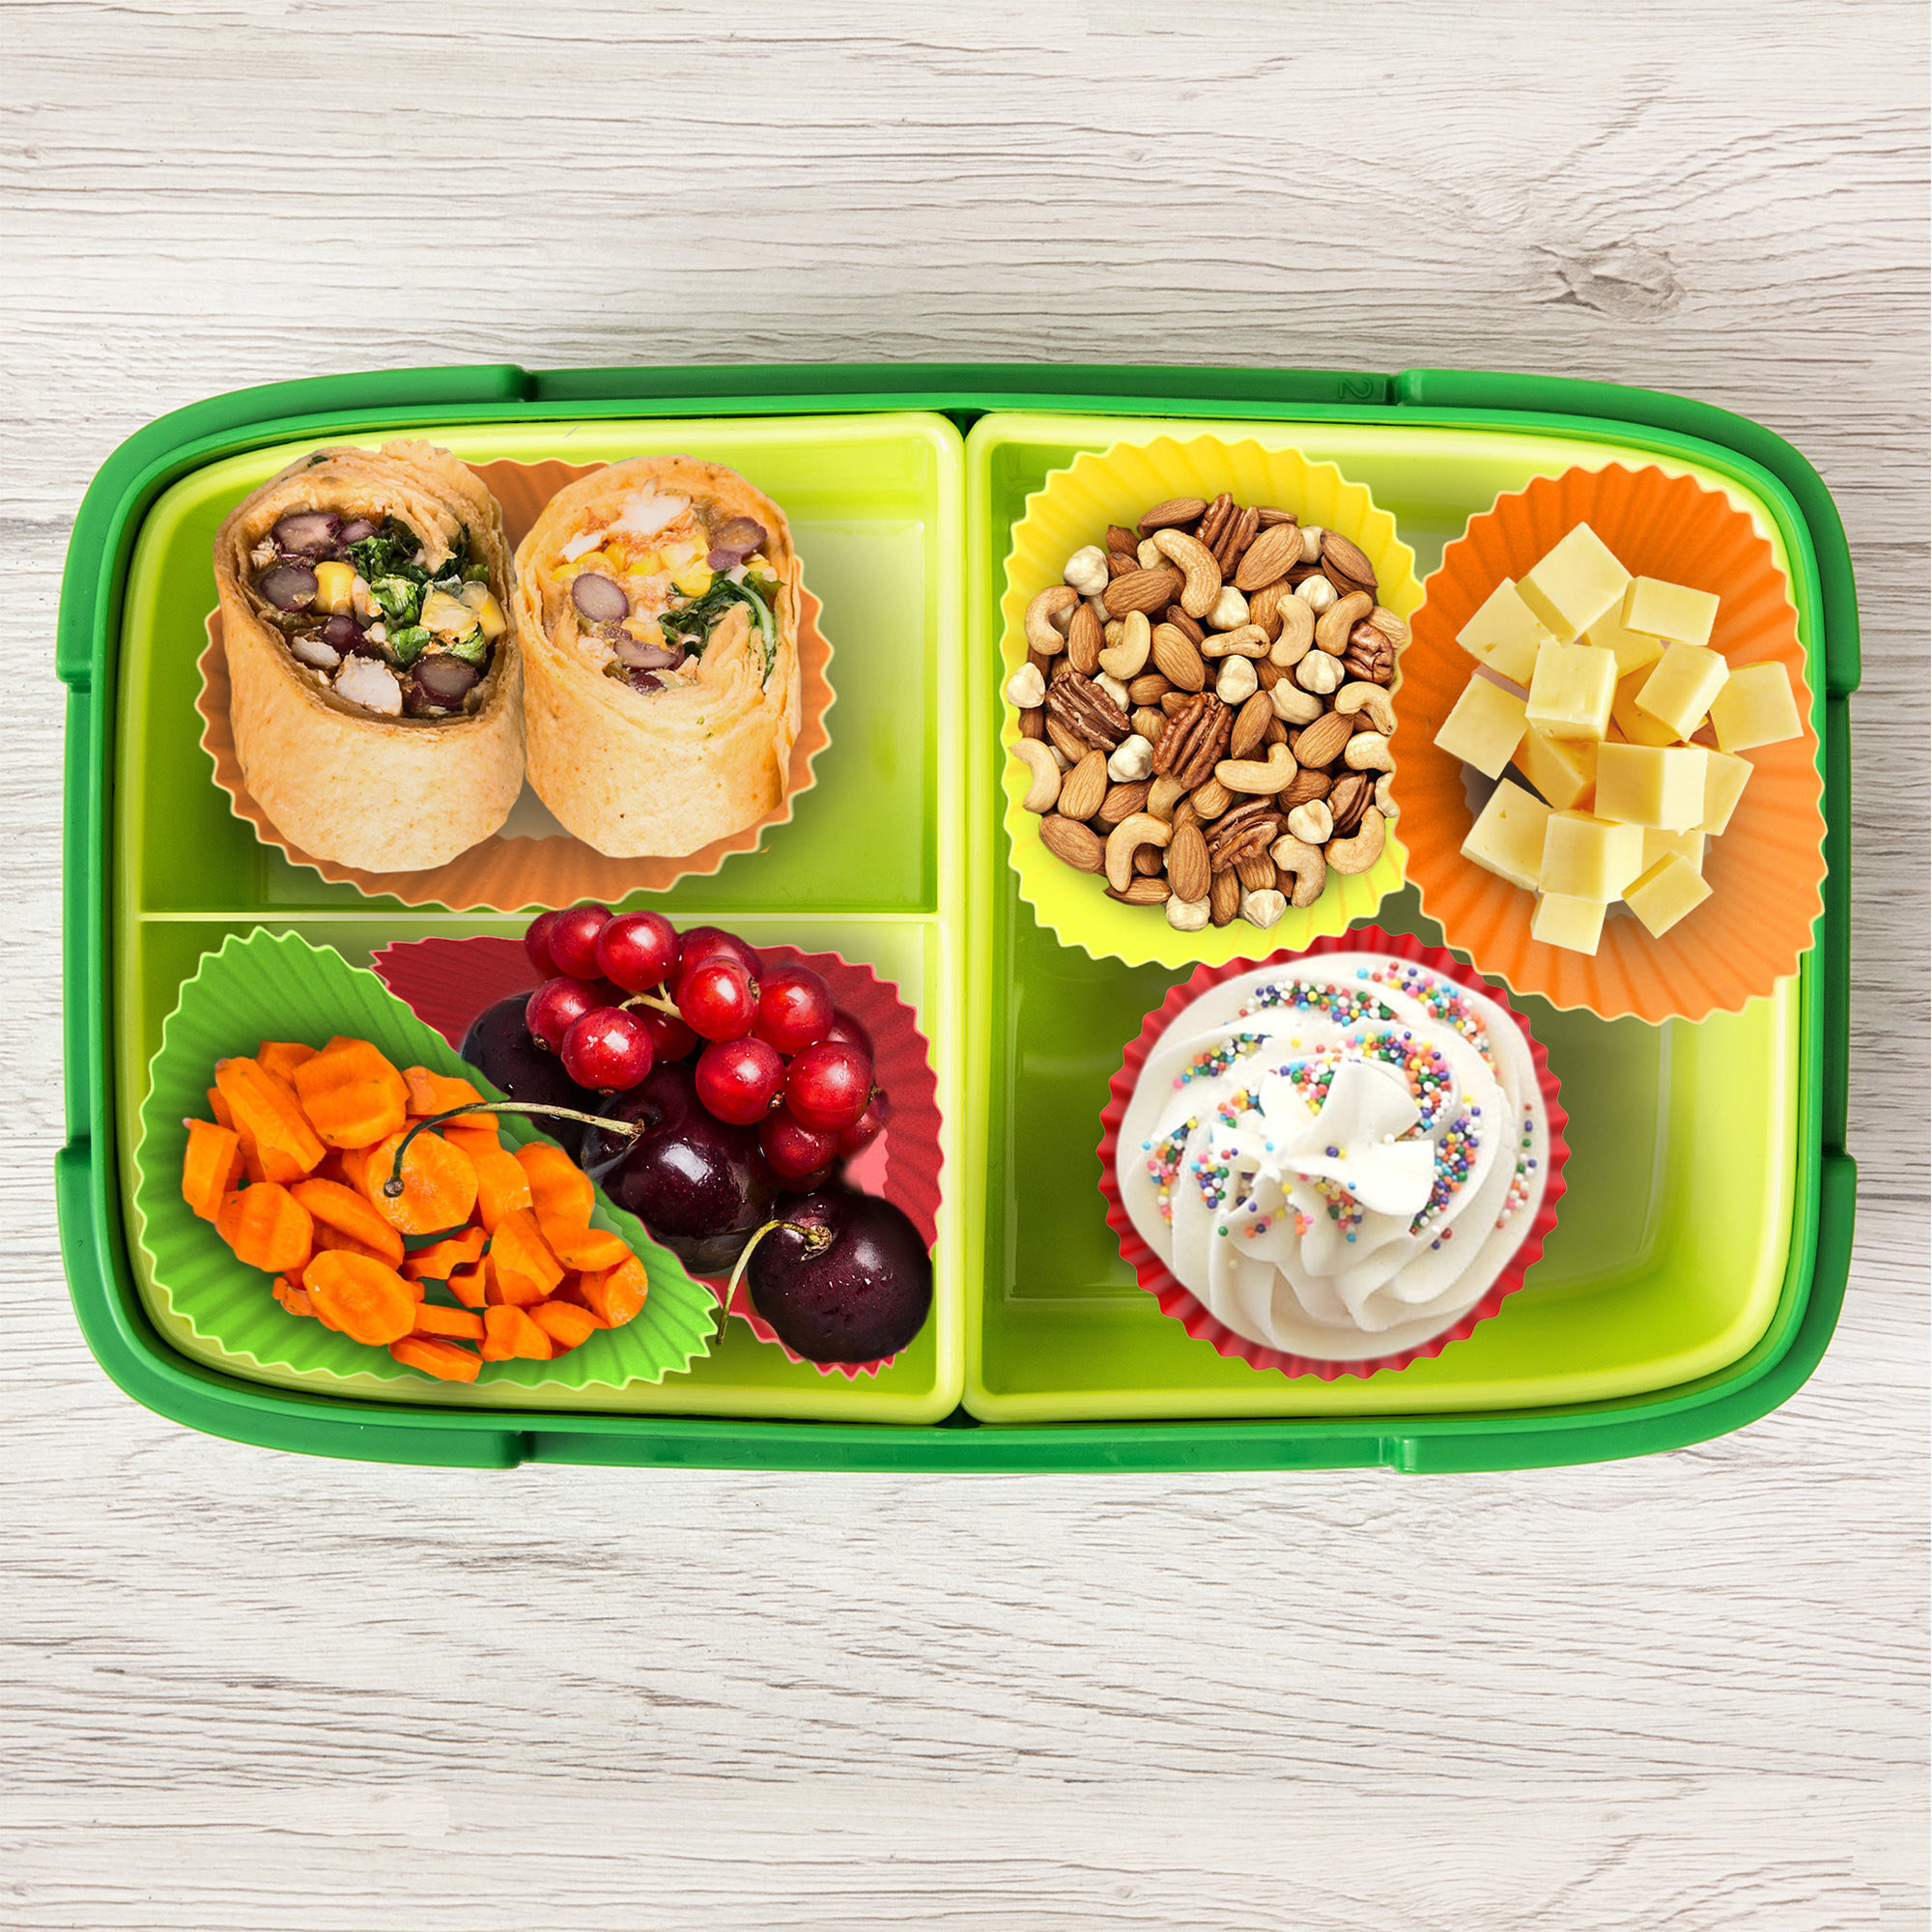 Colorful silicone liners dividing food up in a yellow and green lunchbox